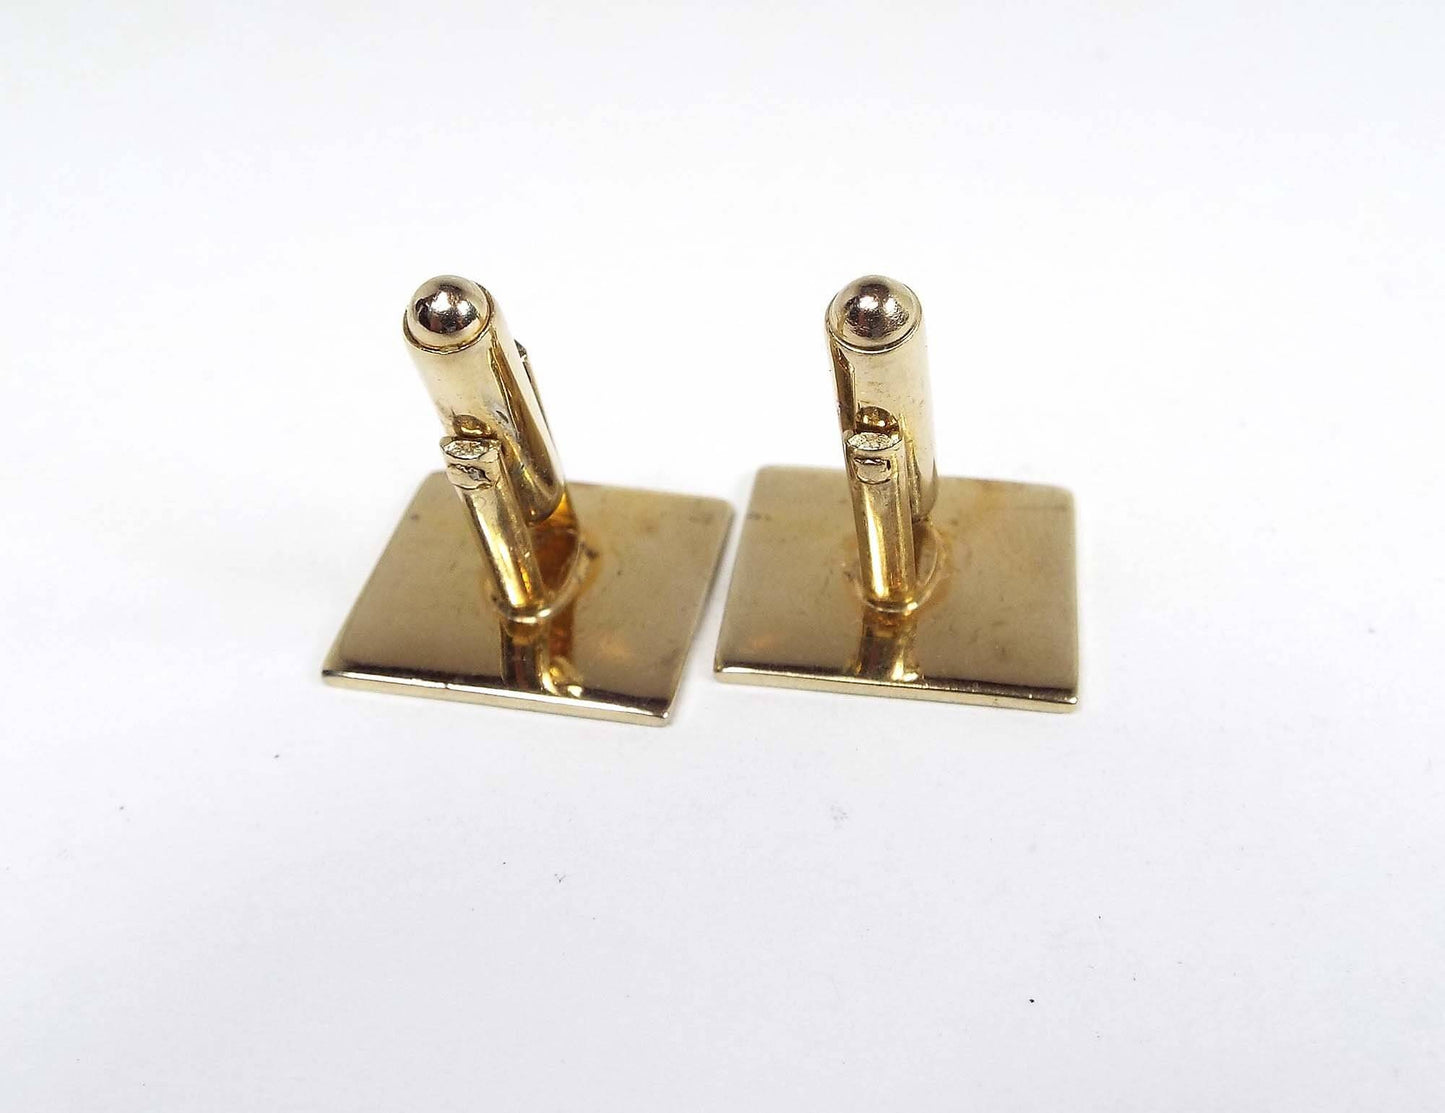 Anson Vintage Matte Gold Tone Cufflinks with Diamond Cut Etched Design, Square Cuff Links